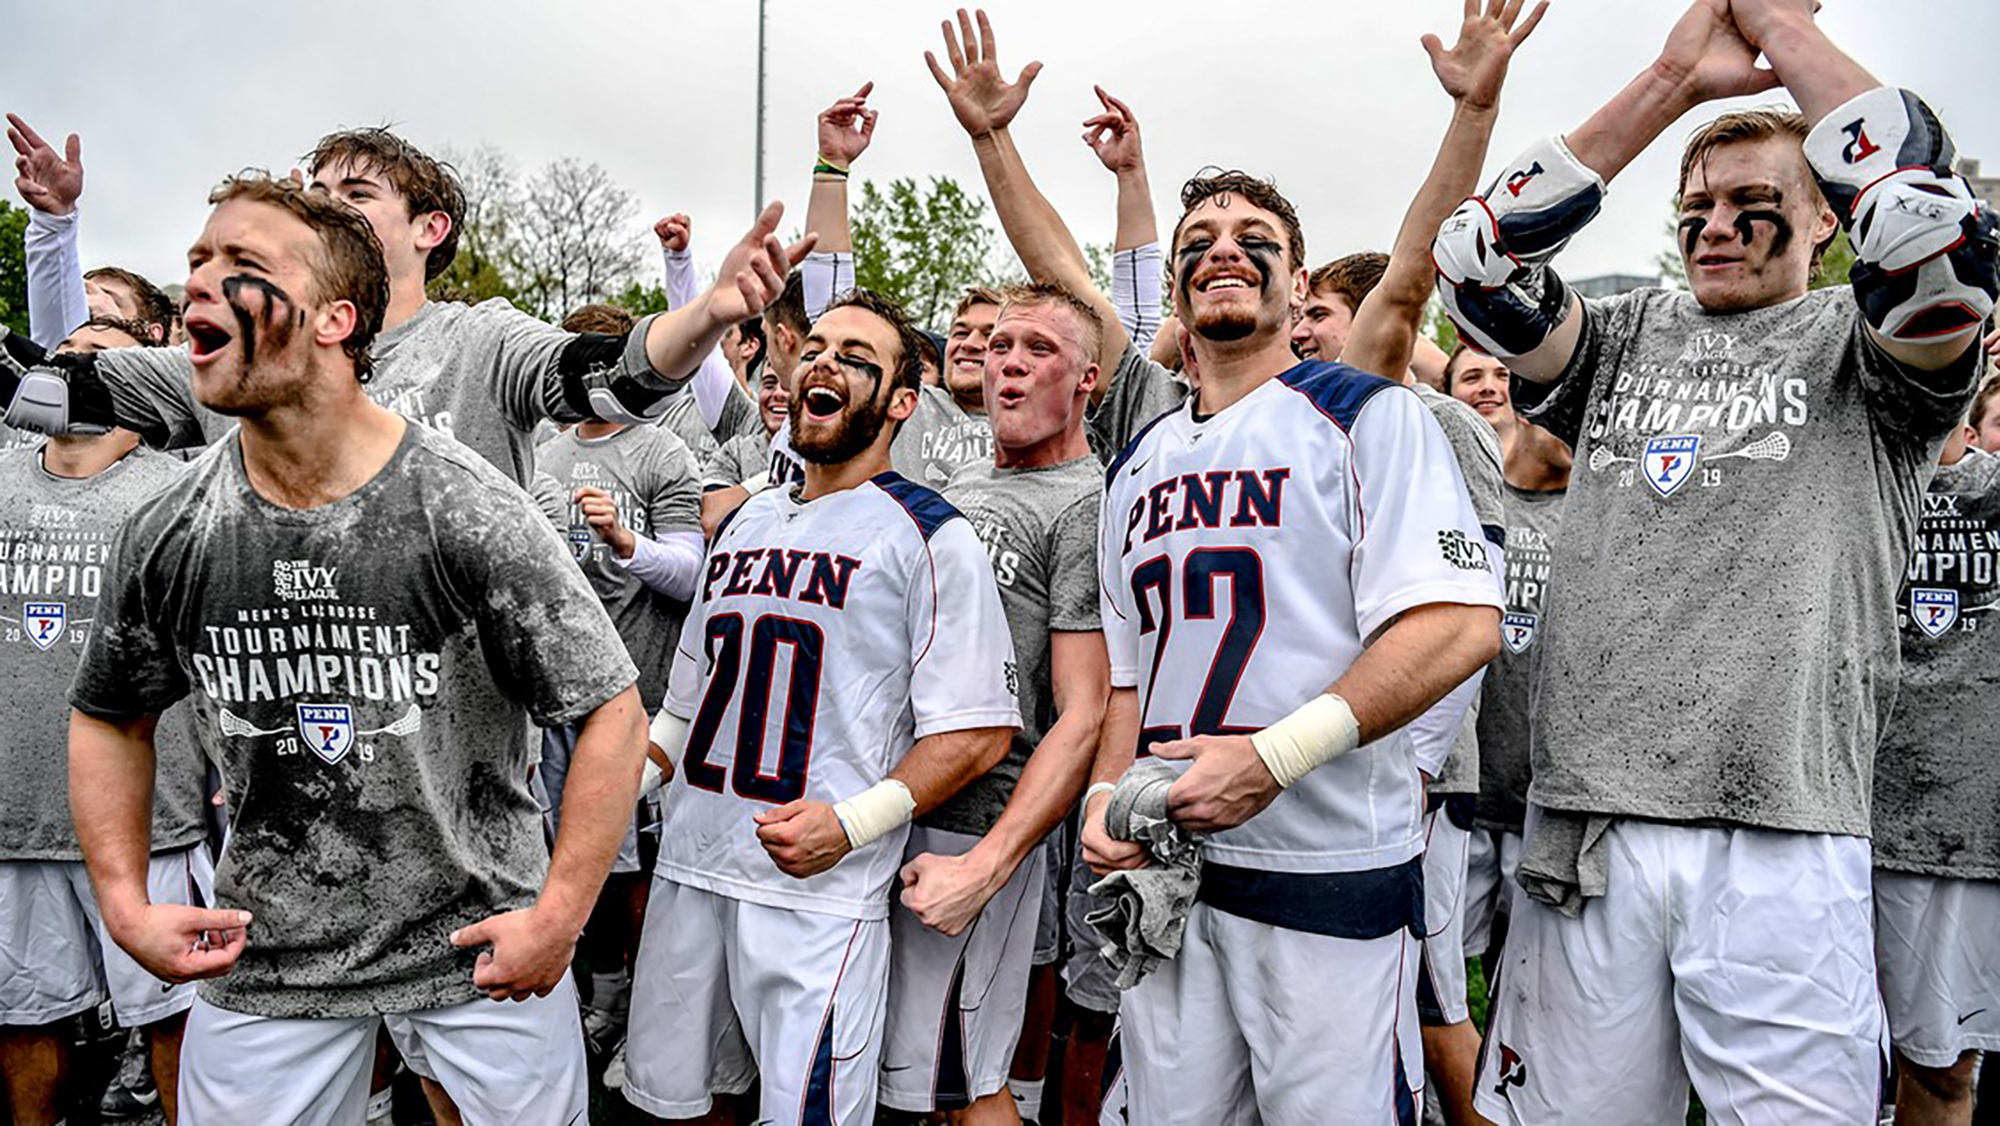 Penn men's lacrosse players celebrate after beating Yale in Ivy tourney final.